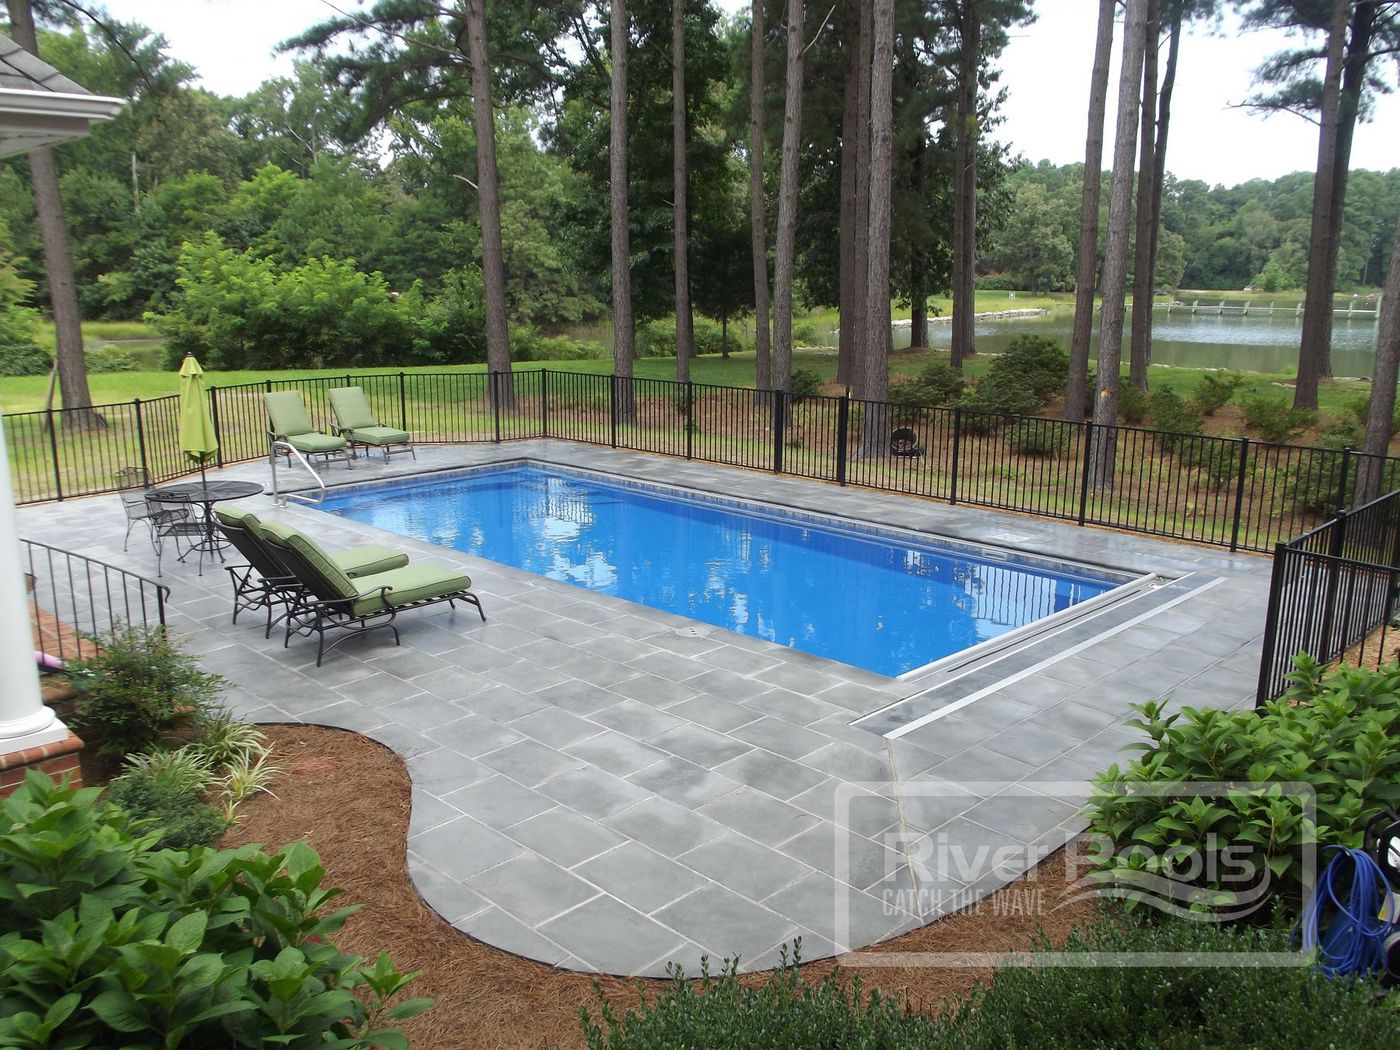 Small Pool Design For A Yard, Can You Put An Inground Pool In A Small Backyard